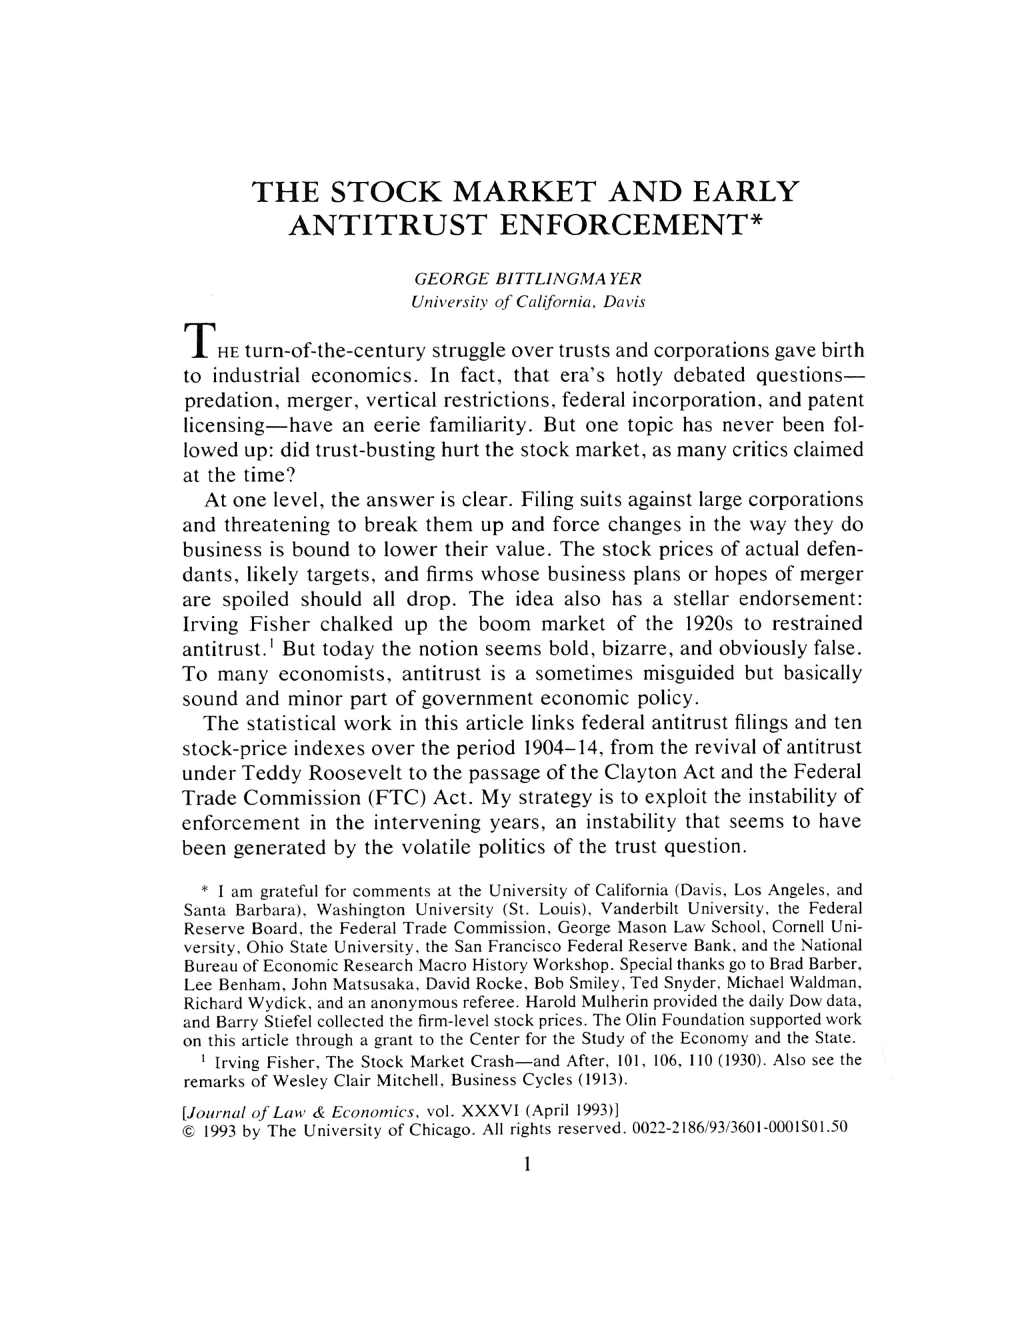 The Stock Market and Early Antitrust Enforcement*